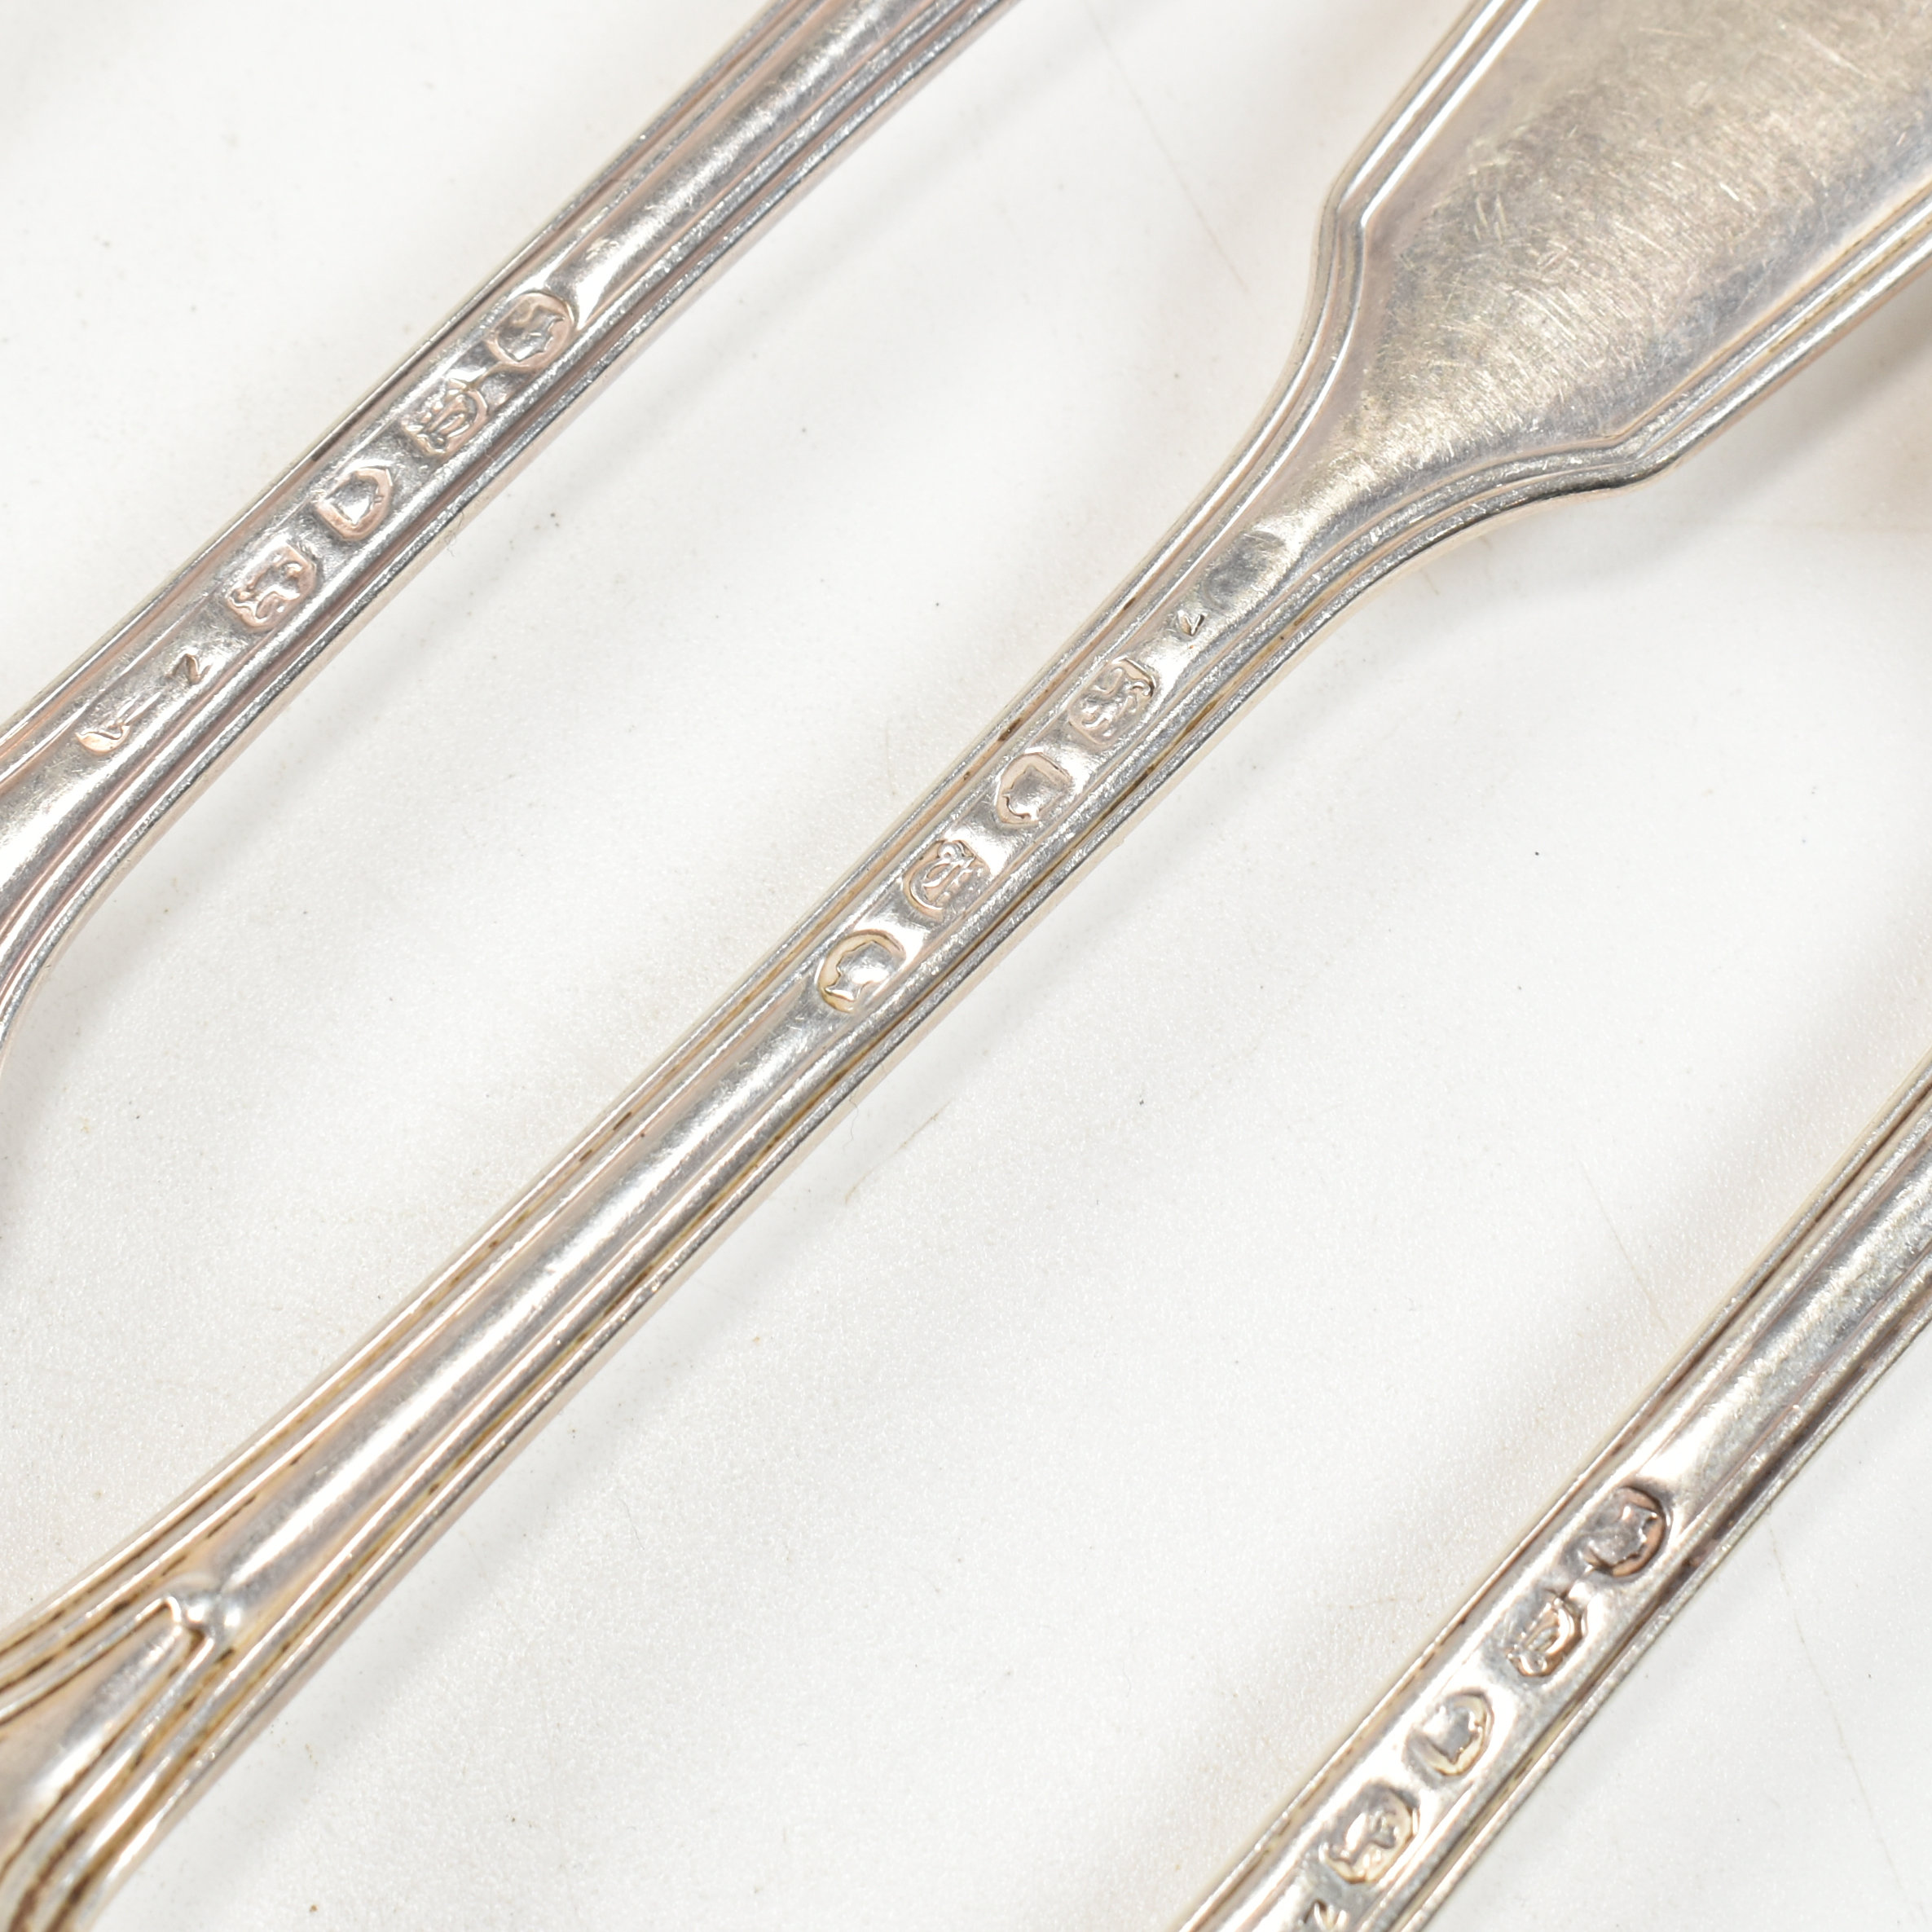 6 VICTORIAN HALLMARKED SILVER FORKS - Image 4 of 6